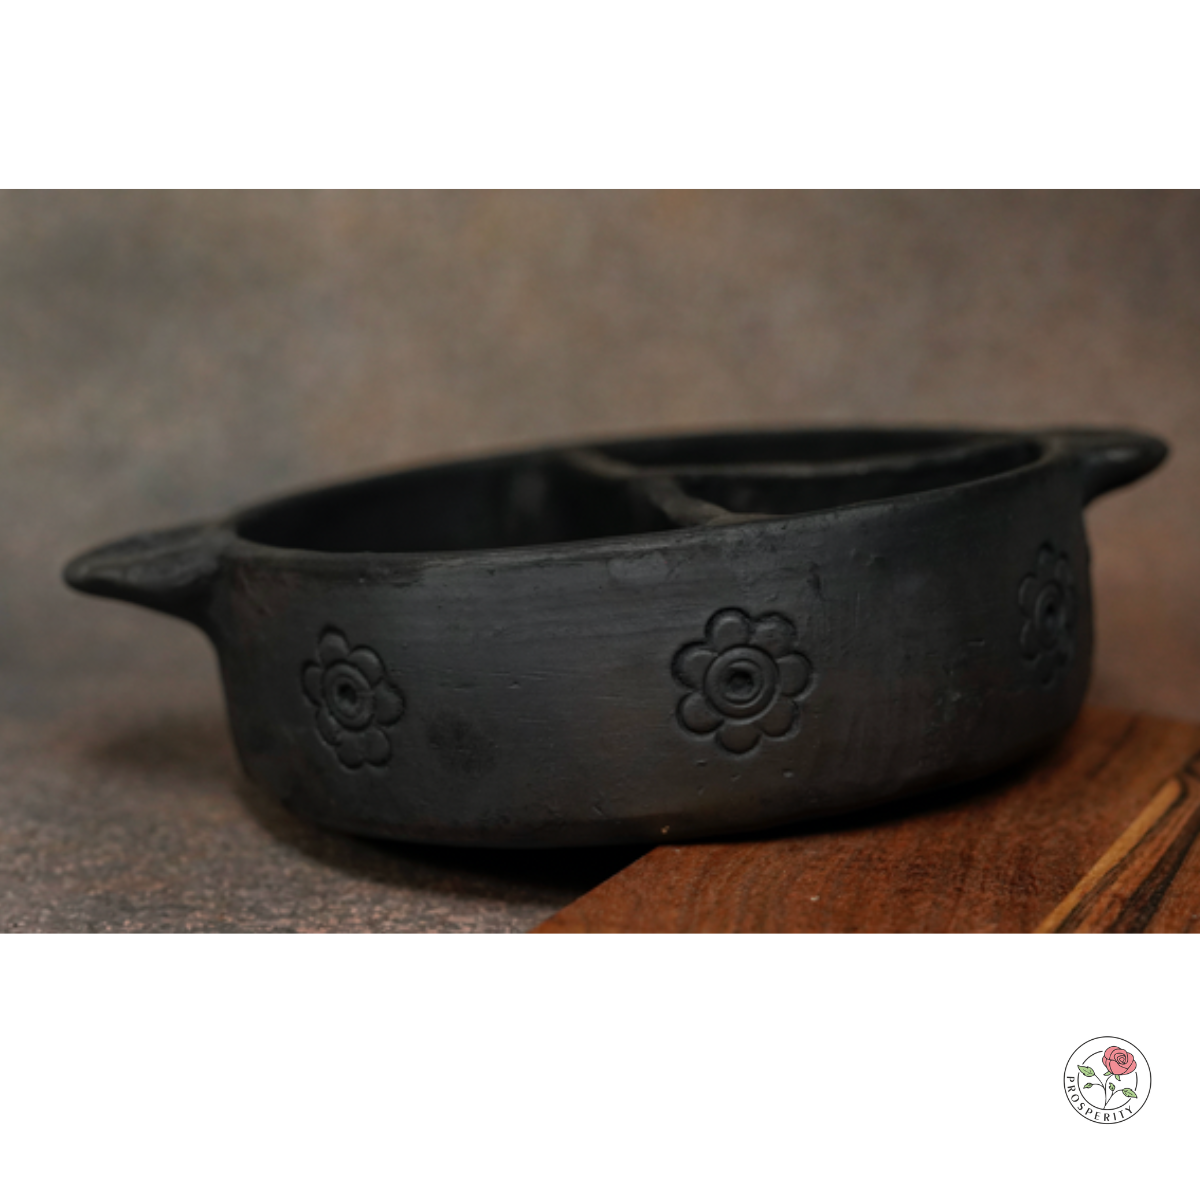 Sawai Madhopur Black Pottery Partition tray/Condiment holder